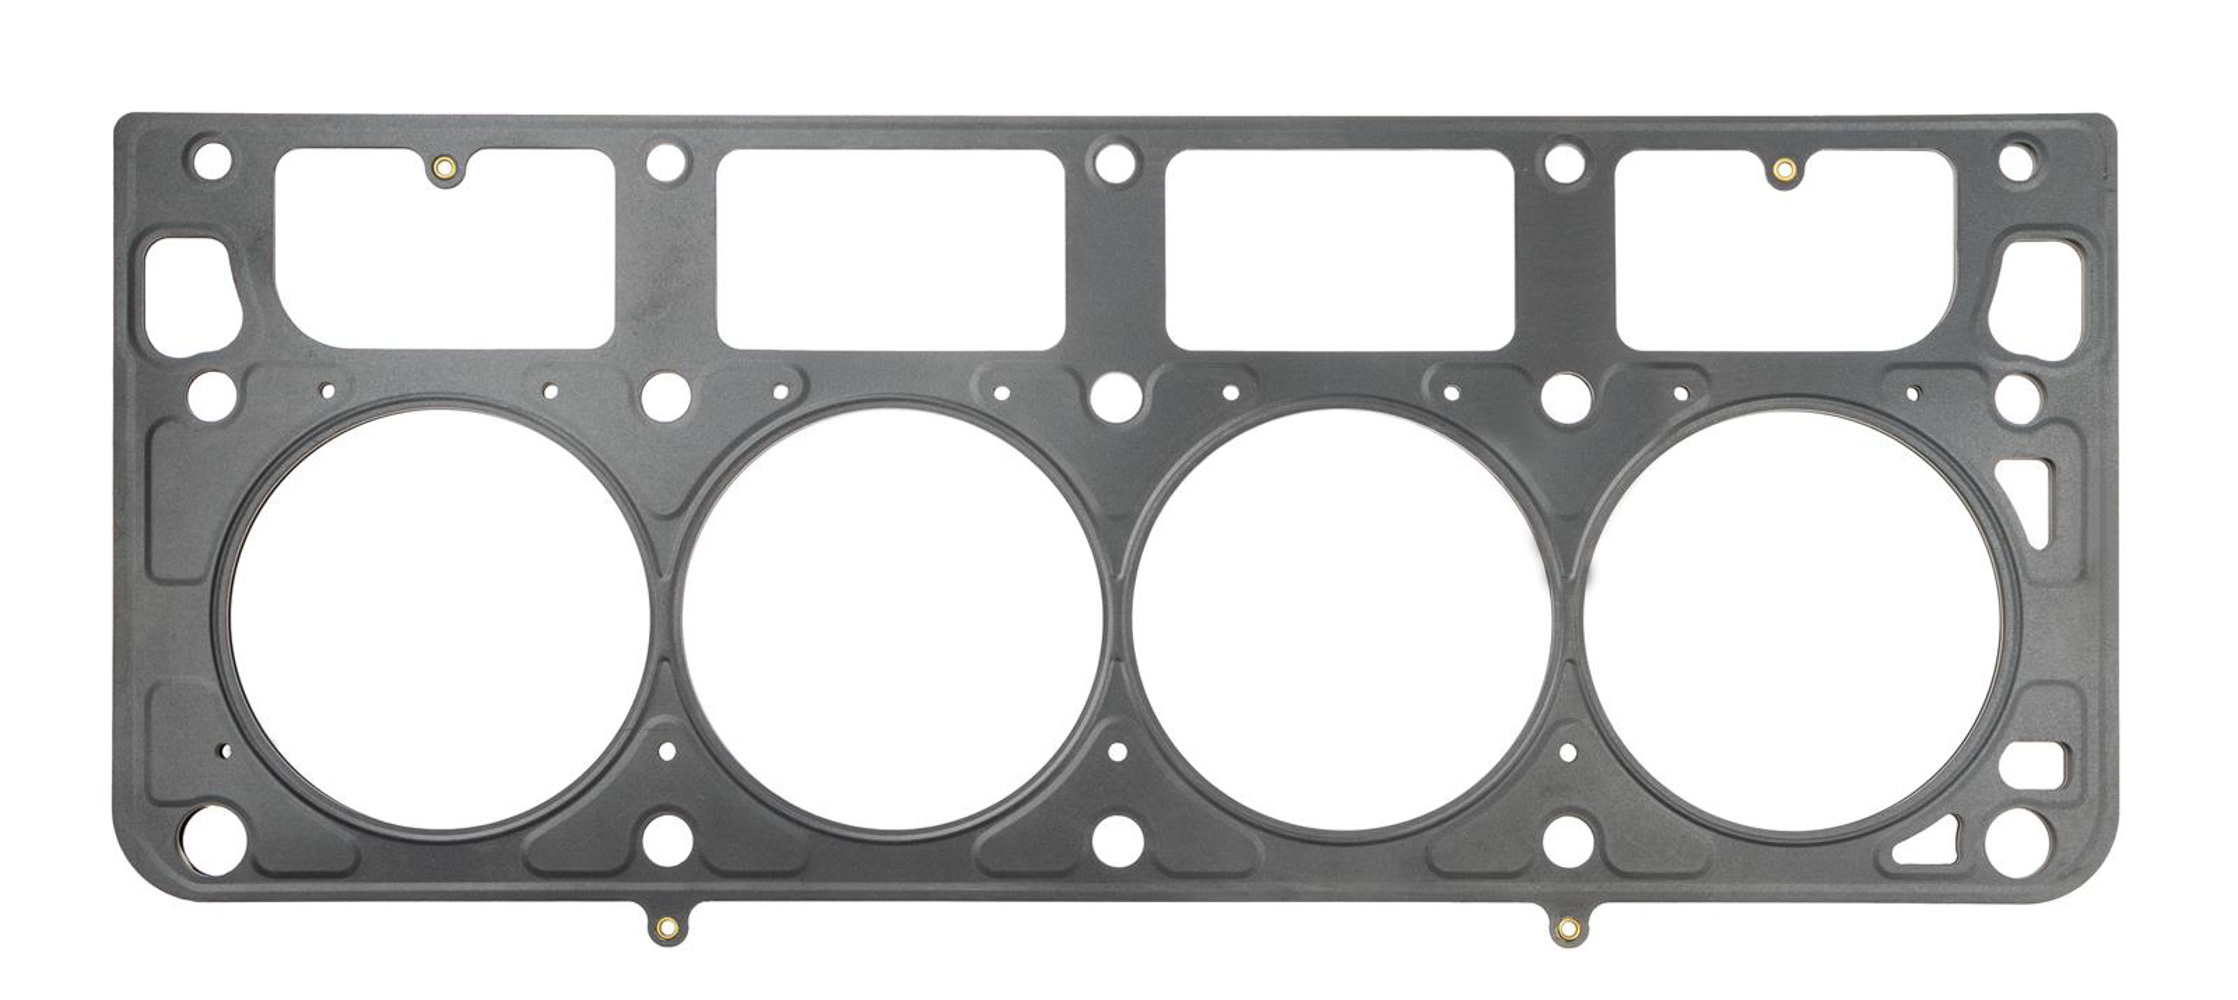 SCE Gaskets M201339 - Cylinder Head Gasket, MLS Spartan, 4.130 in Bore, 0.039 in Compression Thickness, Multi-Layer Steel, GM LS-Series, Each